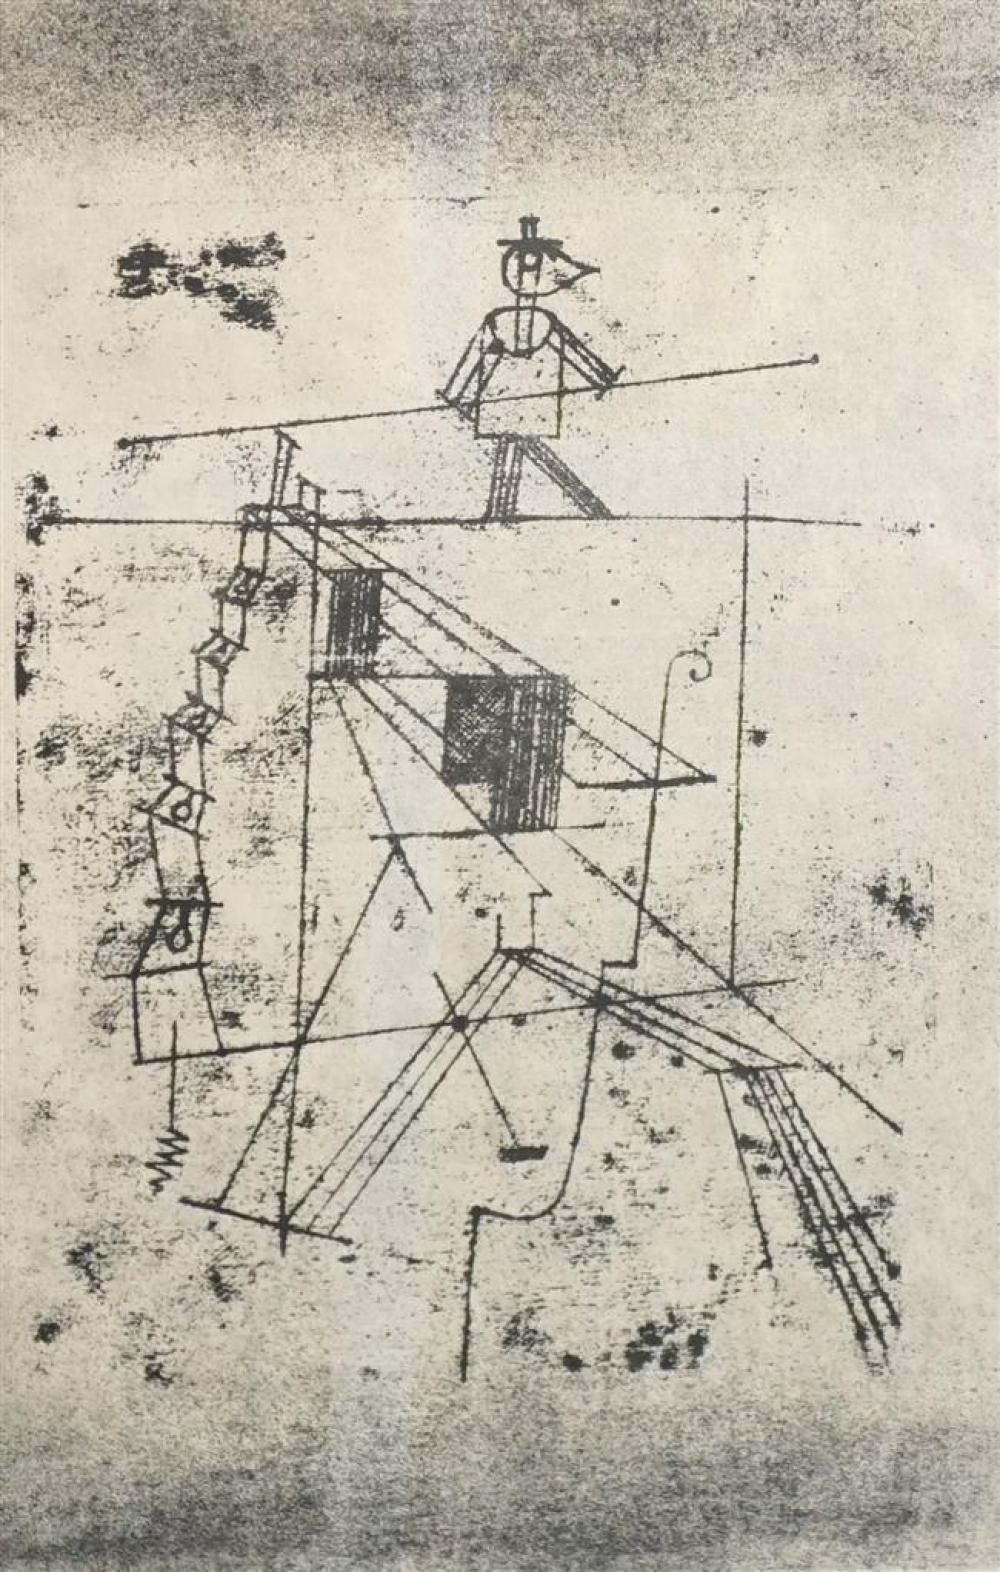 AFTER PAUL KLEE MAN ON A TIGHTROPE  323e1c